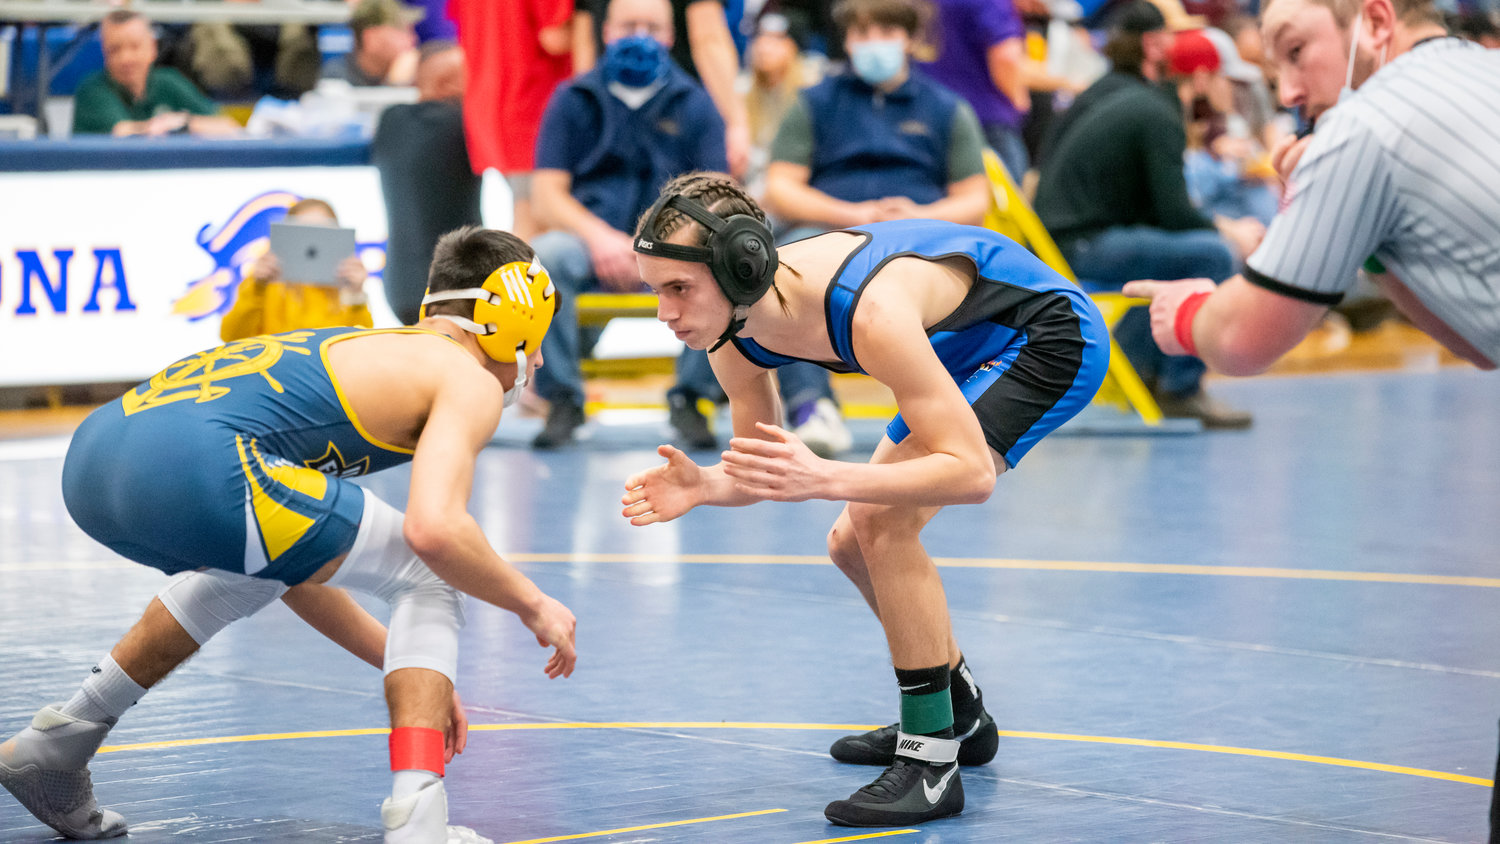 Adna’s Kolton Moon wrestles Xavier Smith from Ilwaco during a match Saturday afternoon in Adna.